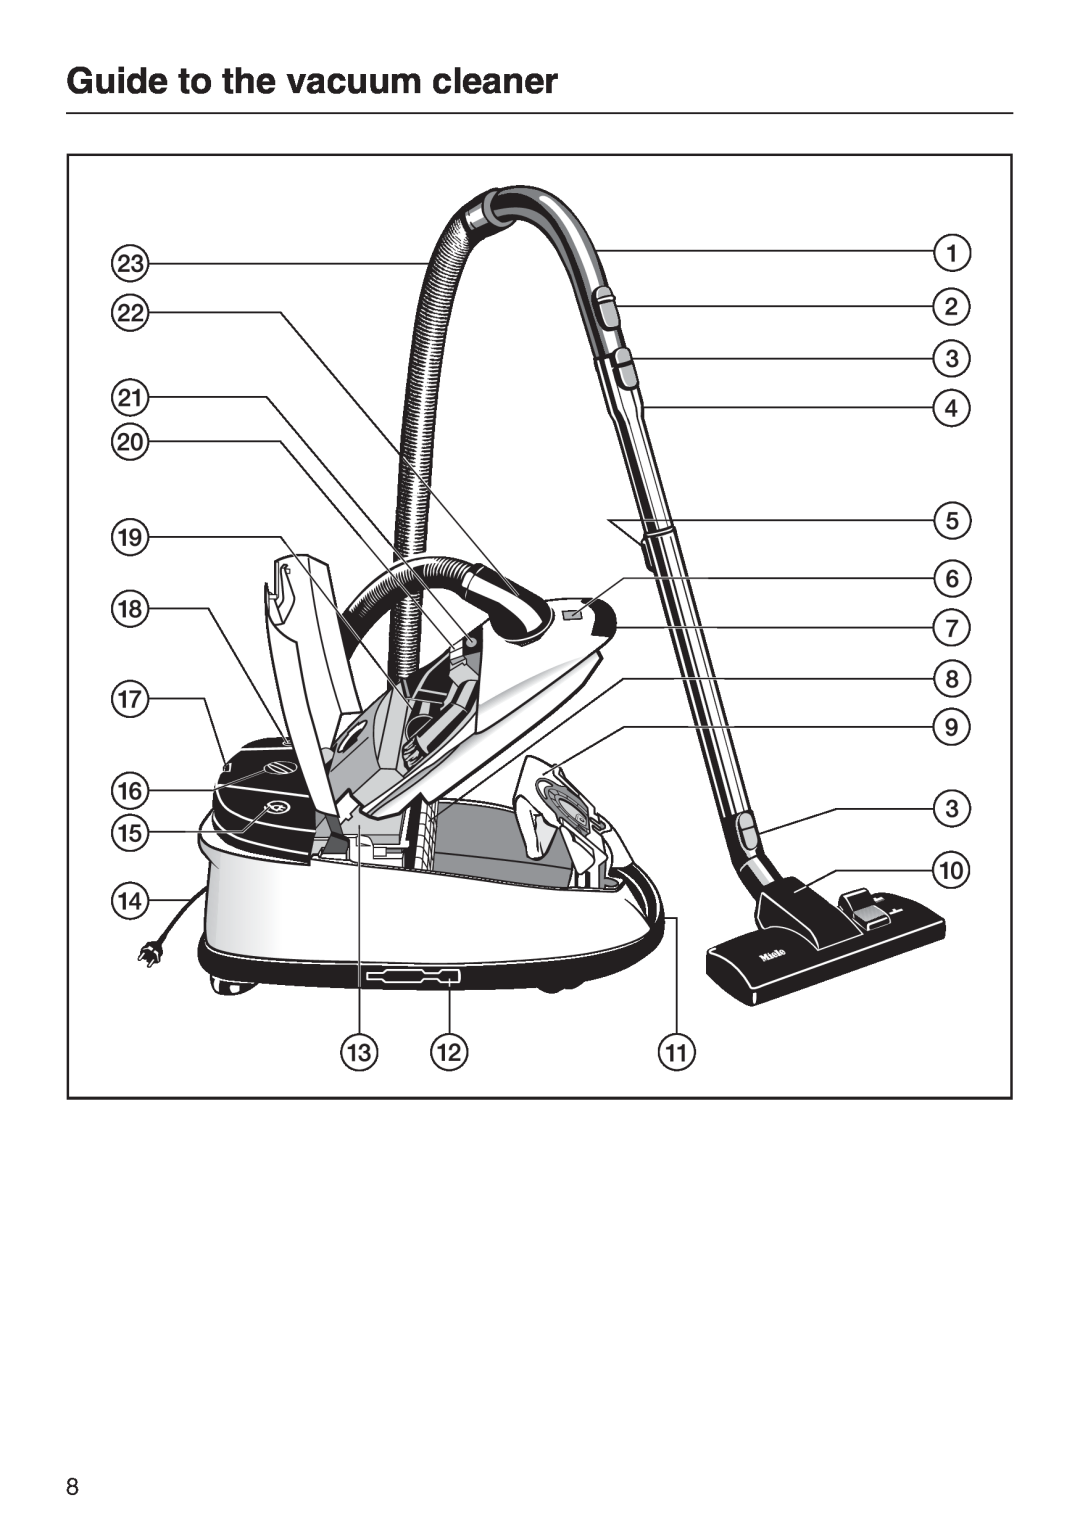 Miele S 700, S 768 manual Guide to the vacuum cleaner 